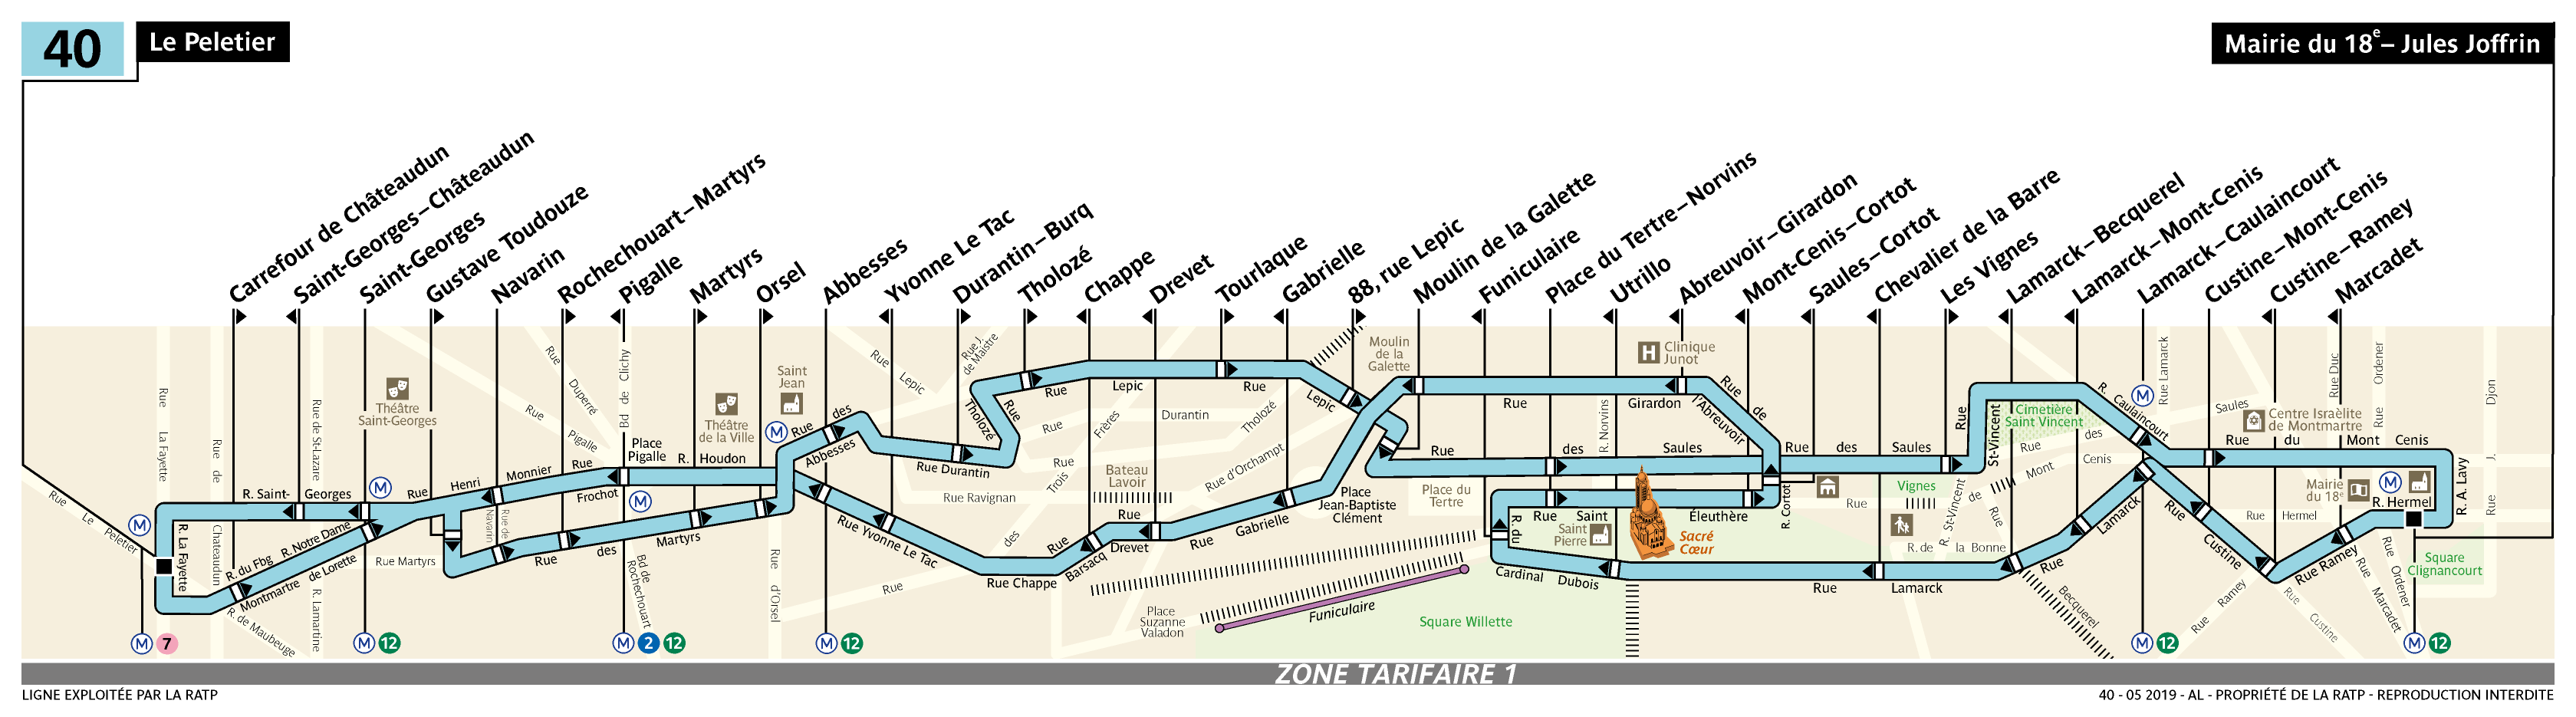 Bus map showing line 40. Most of this route is one-way, with the two directions crossing over each other at various points. Streets, parks and sites of interest are displayed in the background